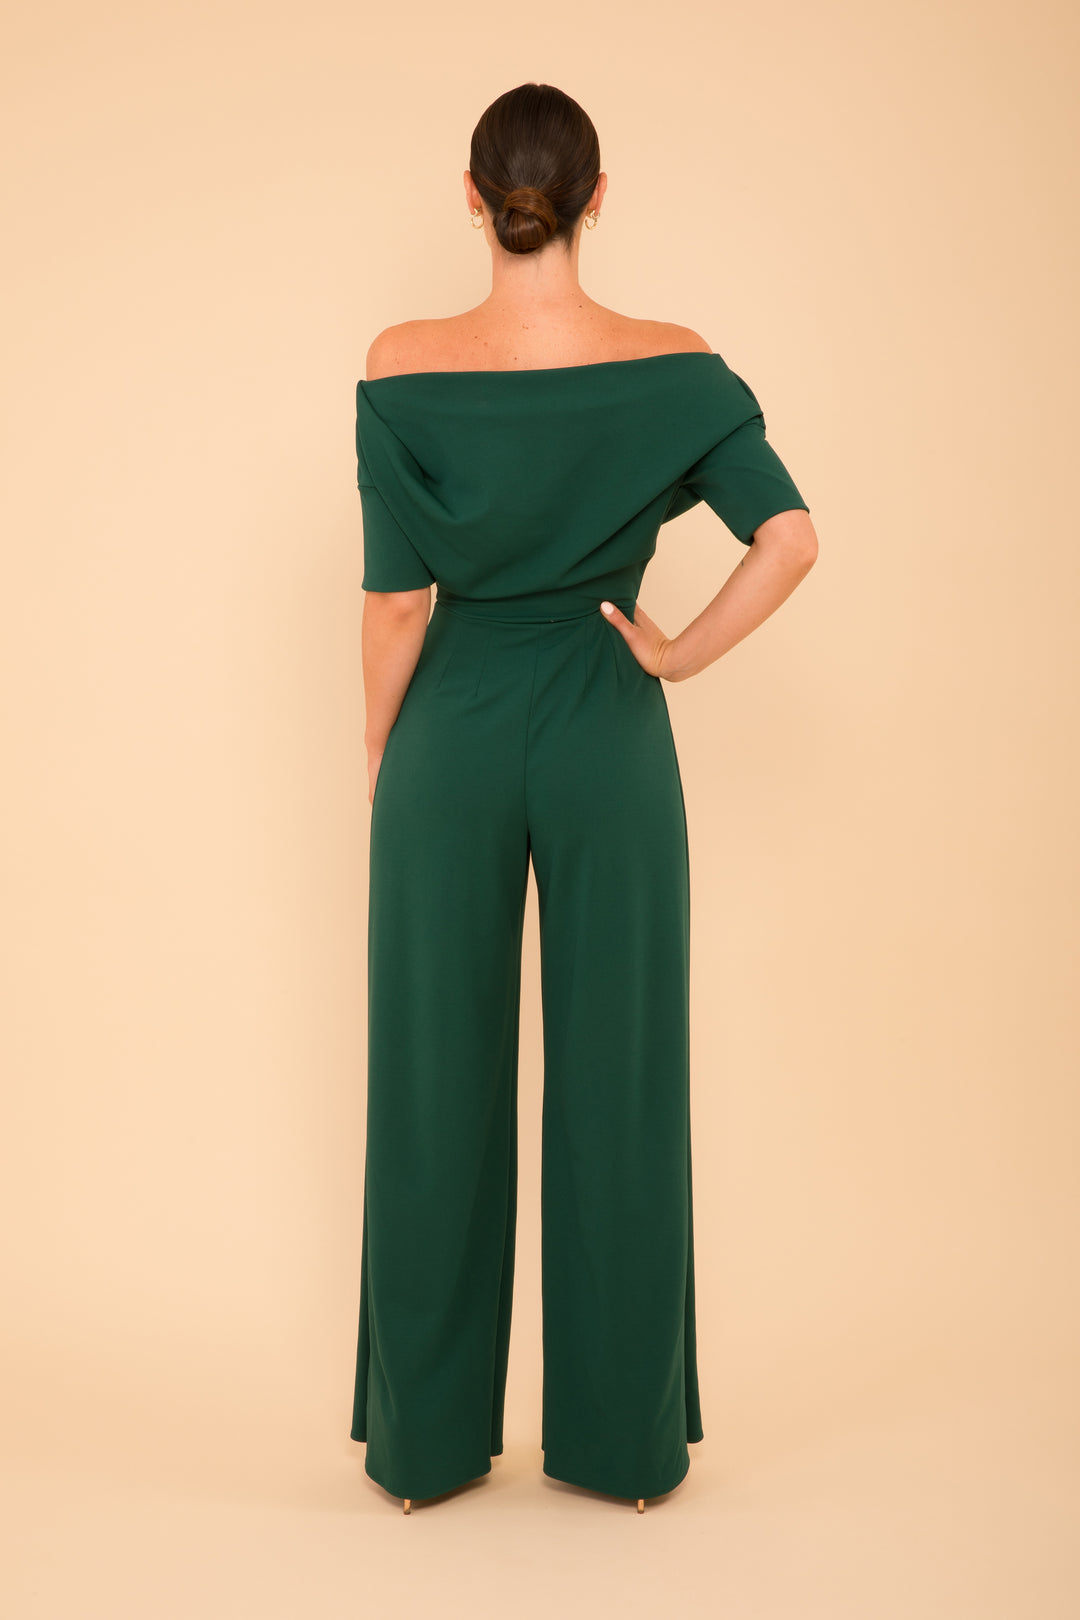 ATOM LABEL lima jumpsuit in forest green